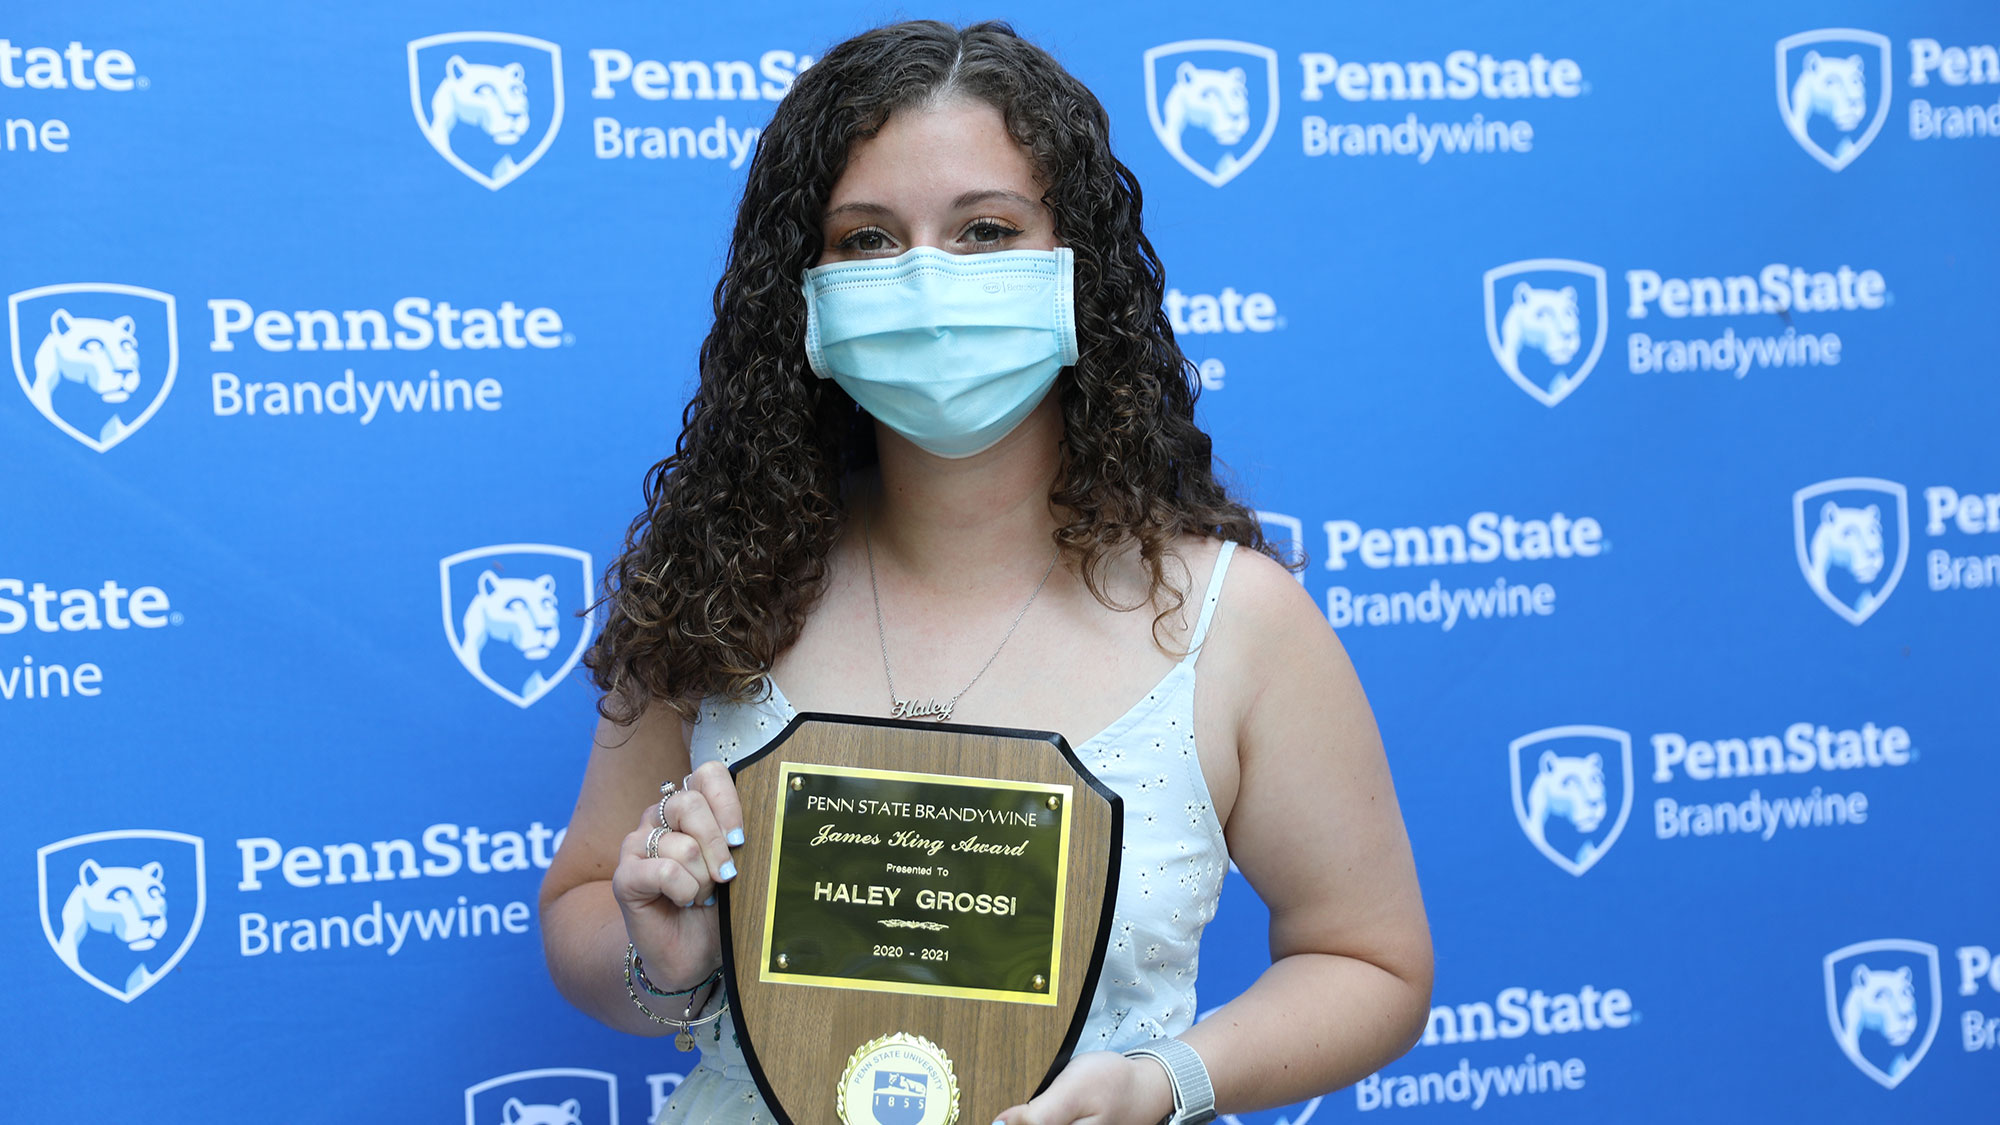 Haley Grossi, the 2021 recipient of the James King Memorial Award